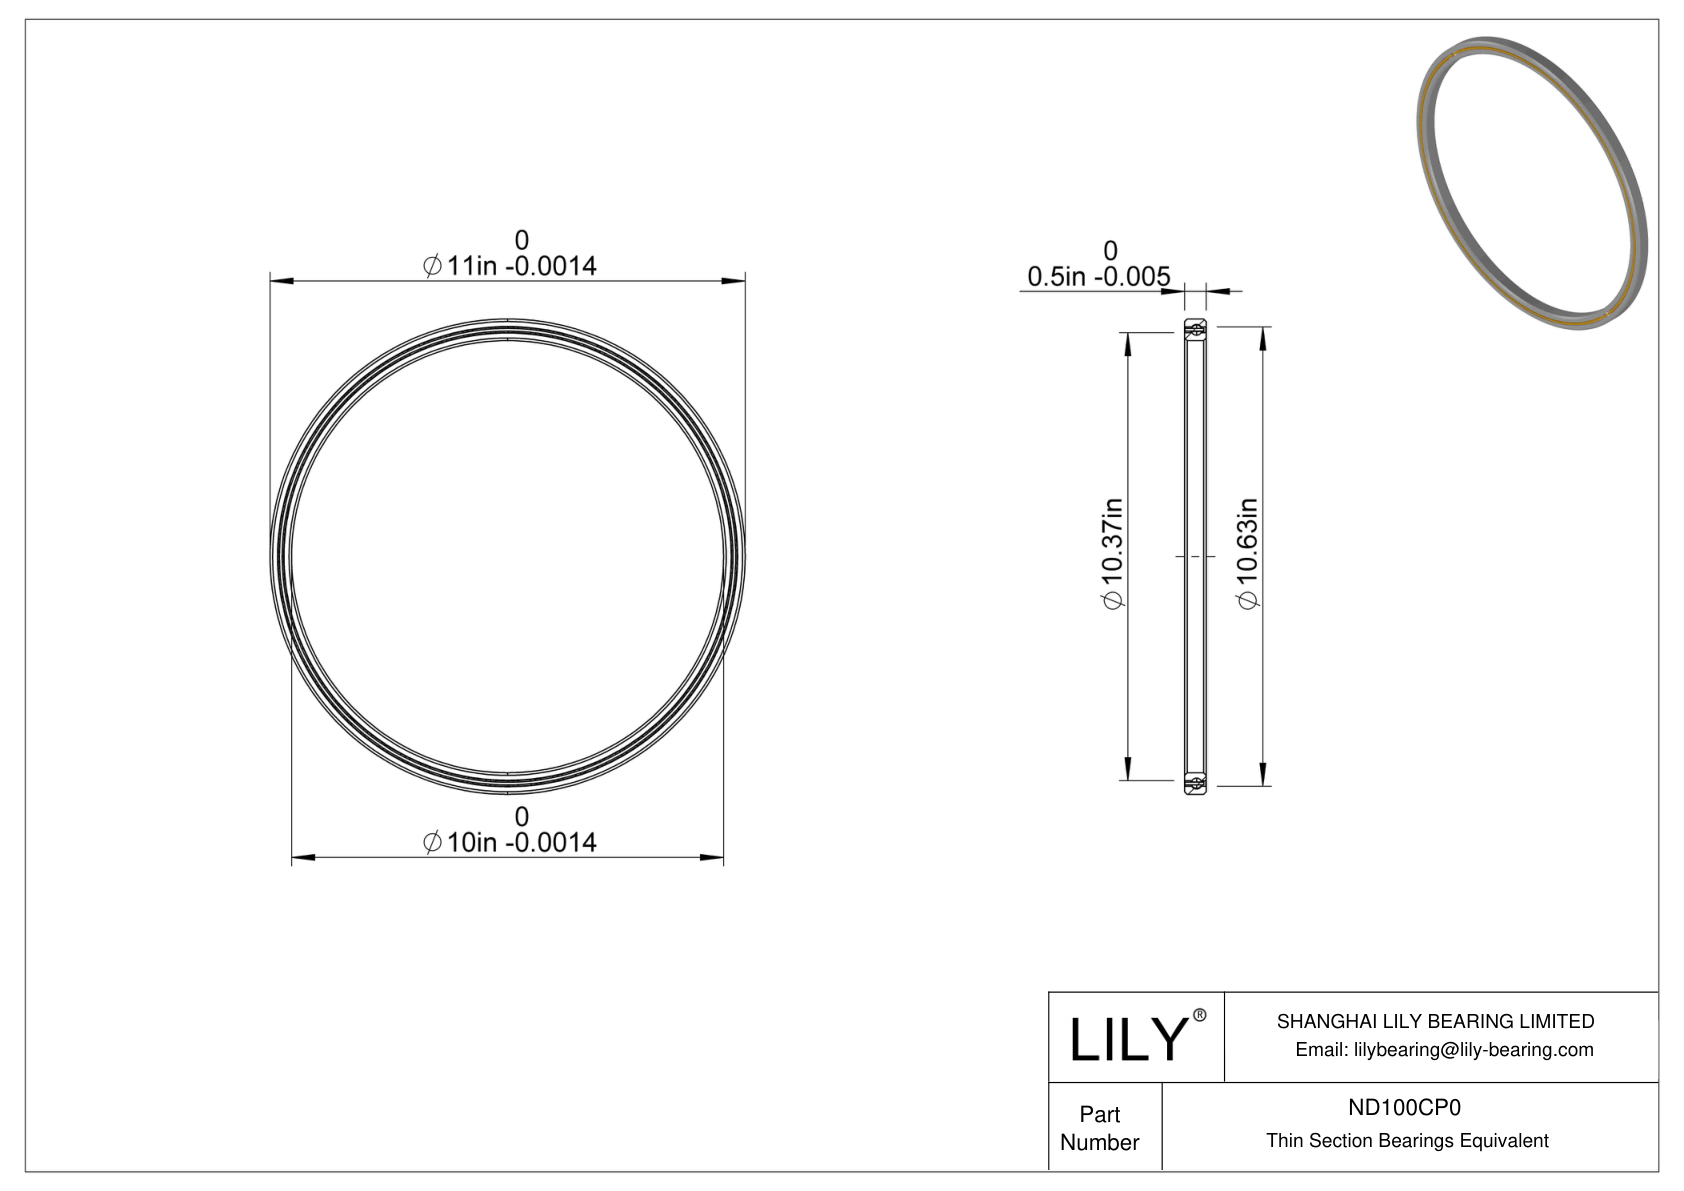 ND100CP0 Constant Section (CS) Bearings cad drawing